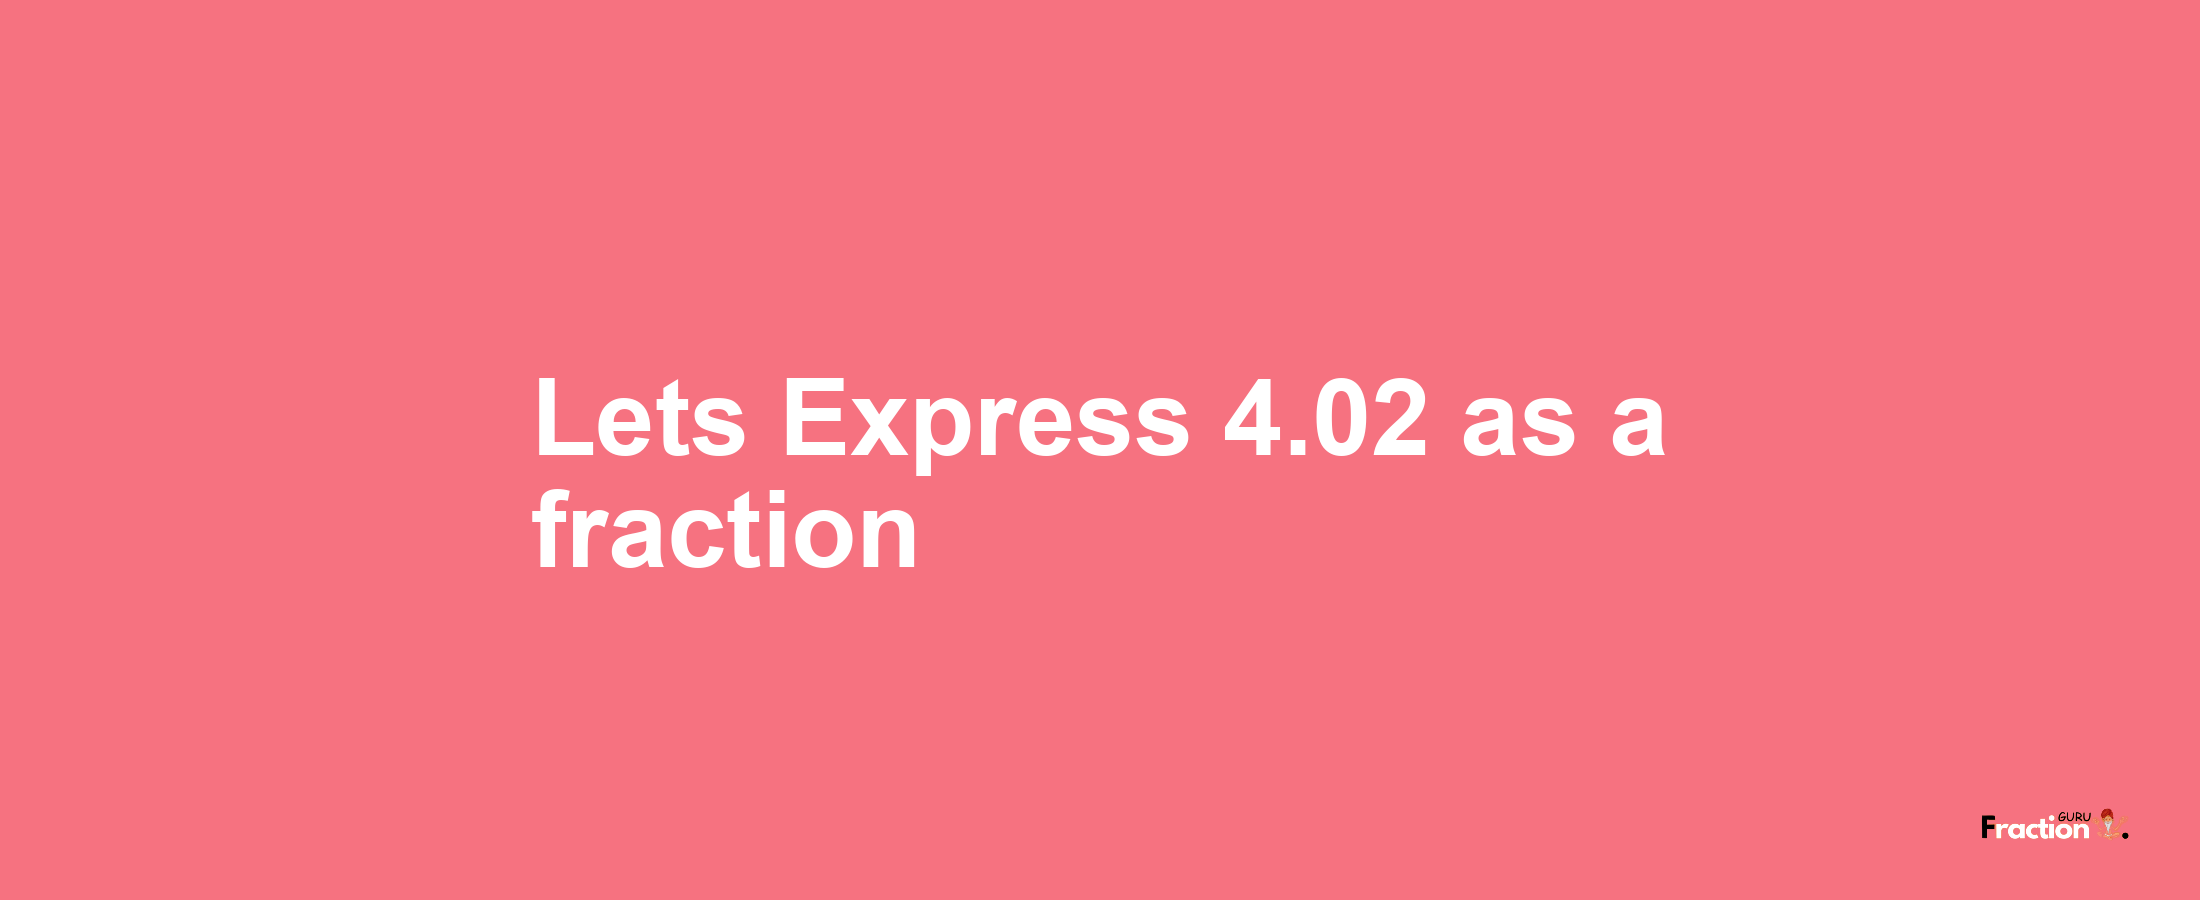 Lets Express 4.02 as afraction